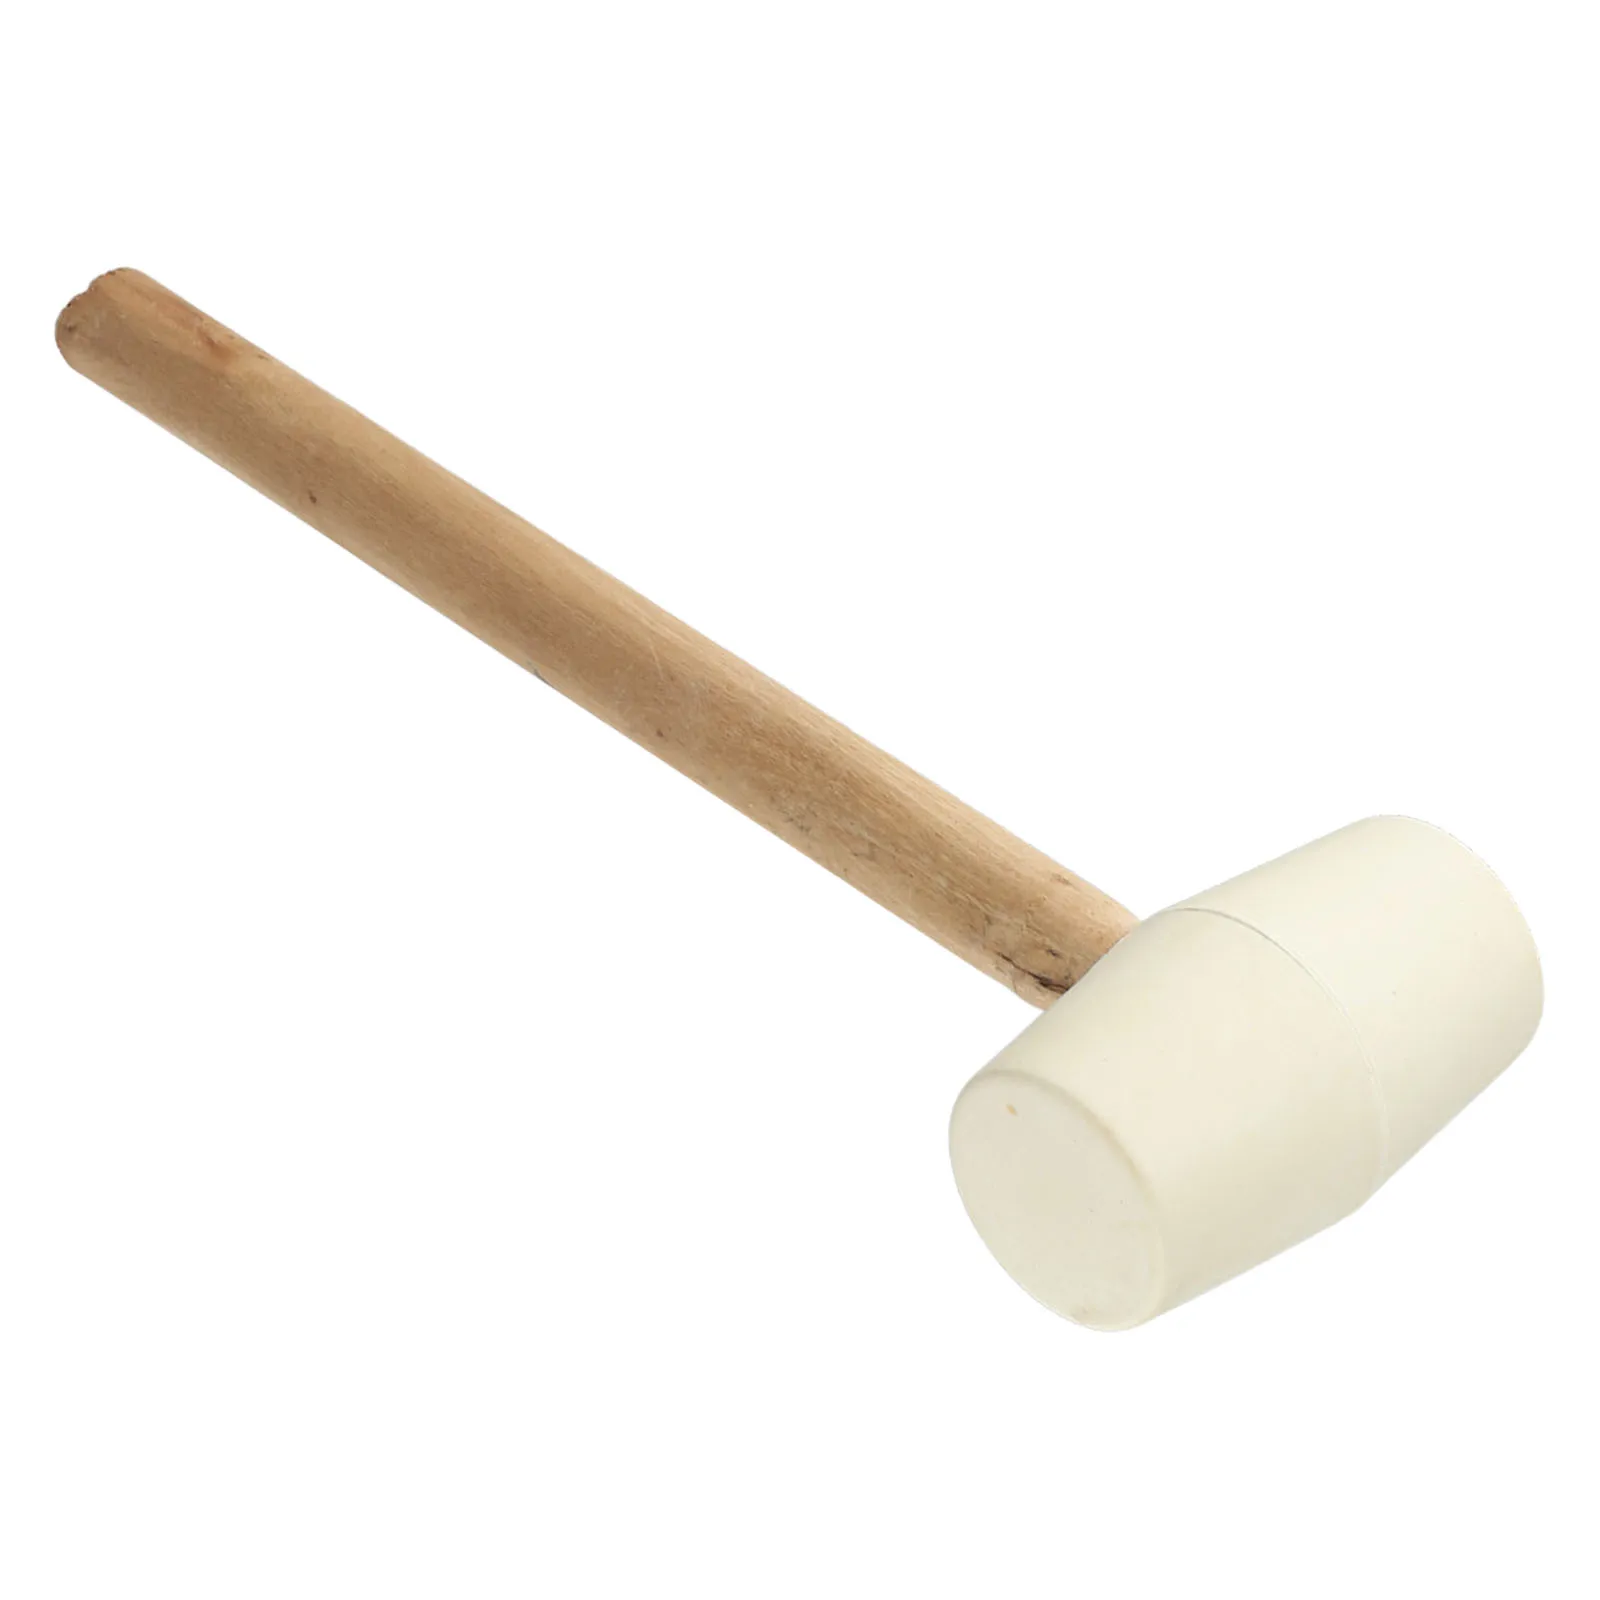 

Rubber Hammer Mallet With Wood Handle For FloorTile Installation Decoration White Rubber Hammer 250g Rubber Head Wood Handle